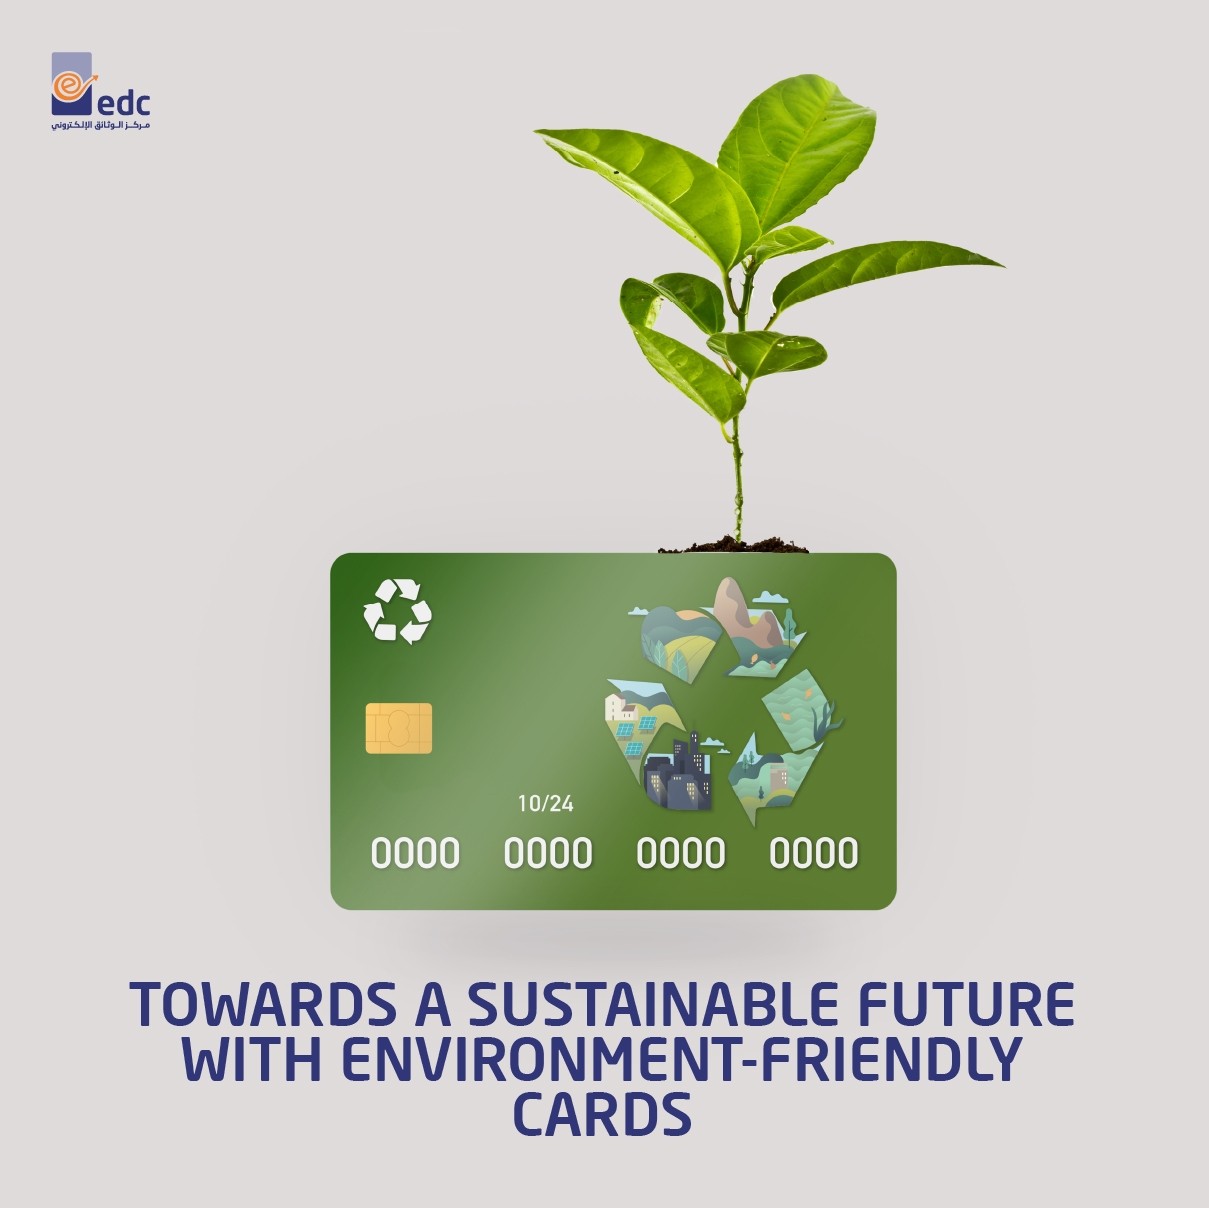 Towards a Sustainable Future with Environment-Friendly Cards